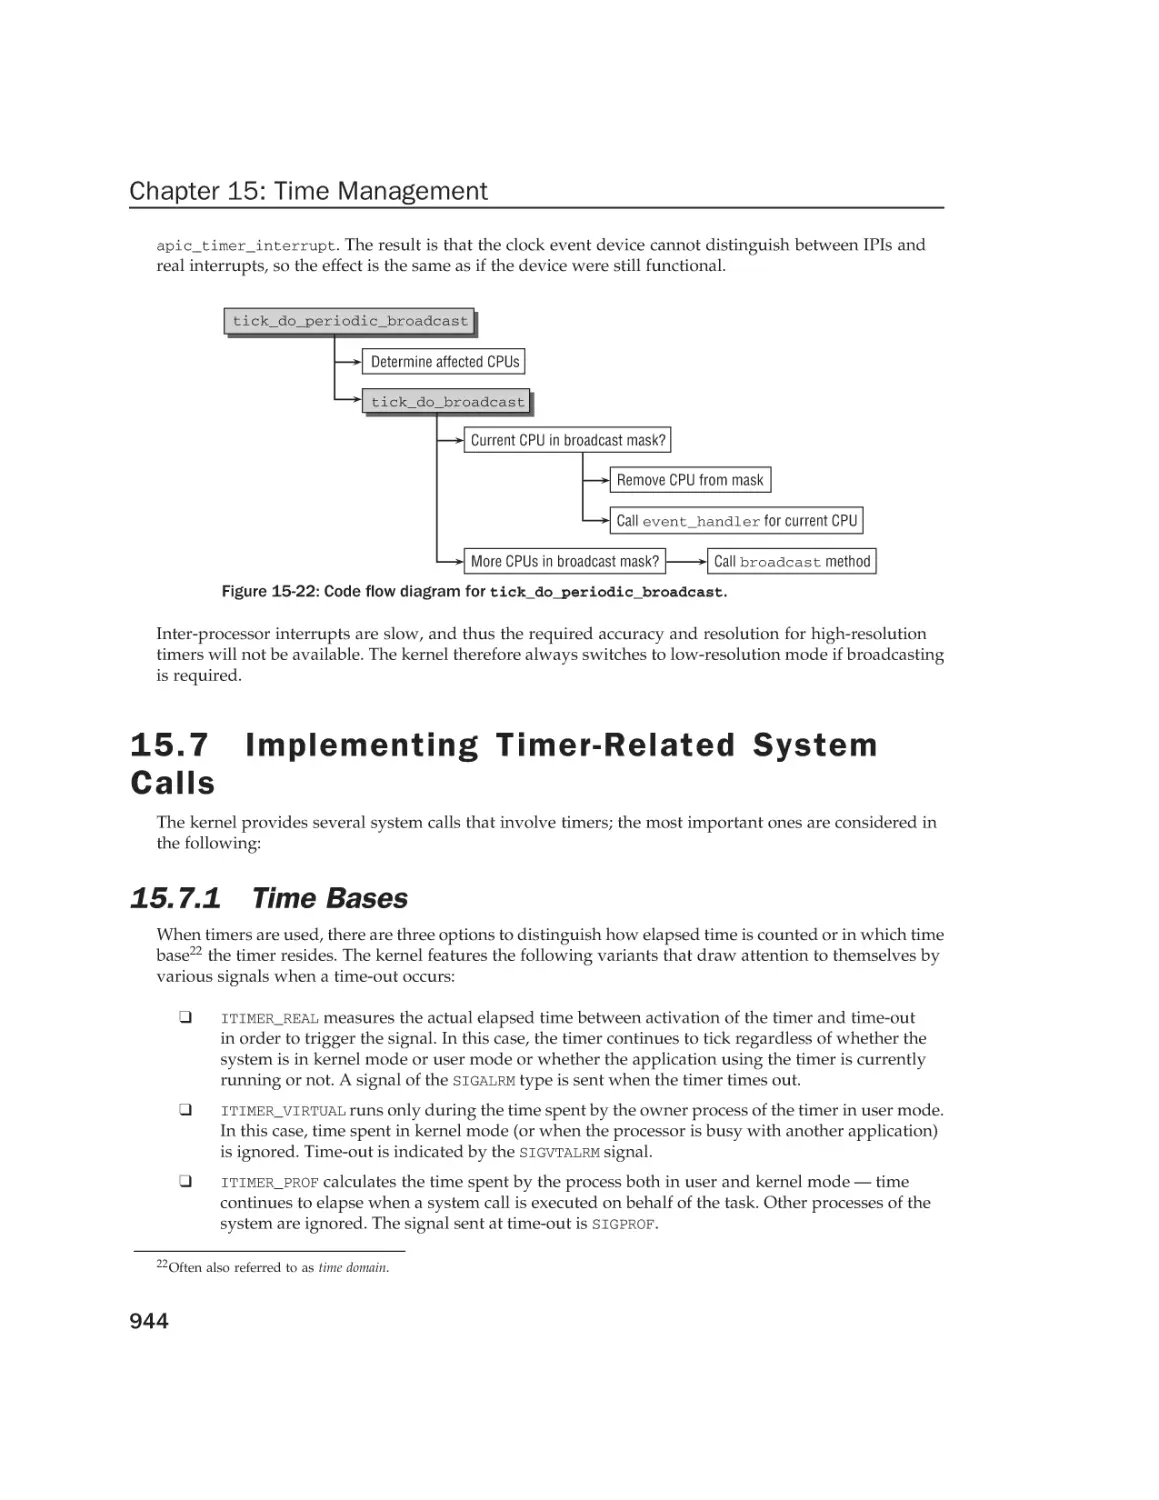 15.7 Implementing Timer-Related System Calls